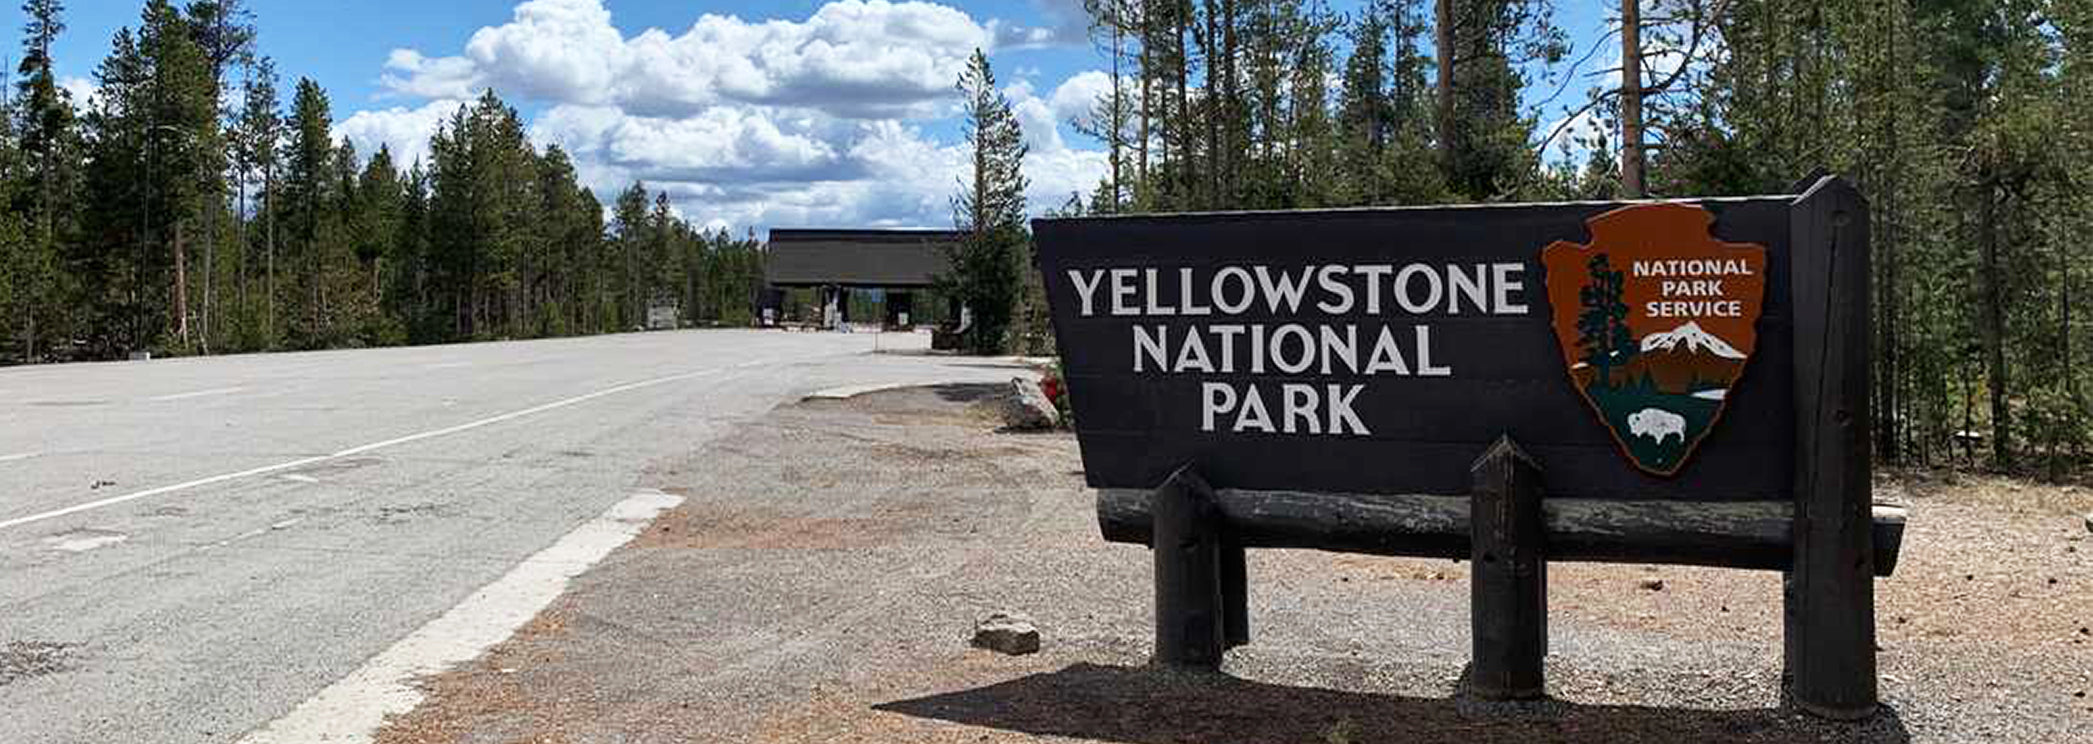 Yellowstone National Park products